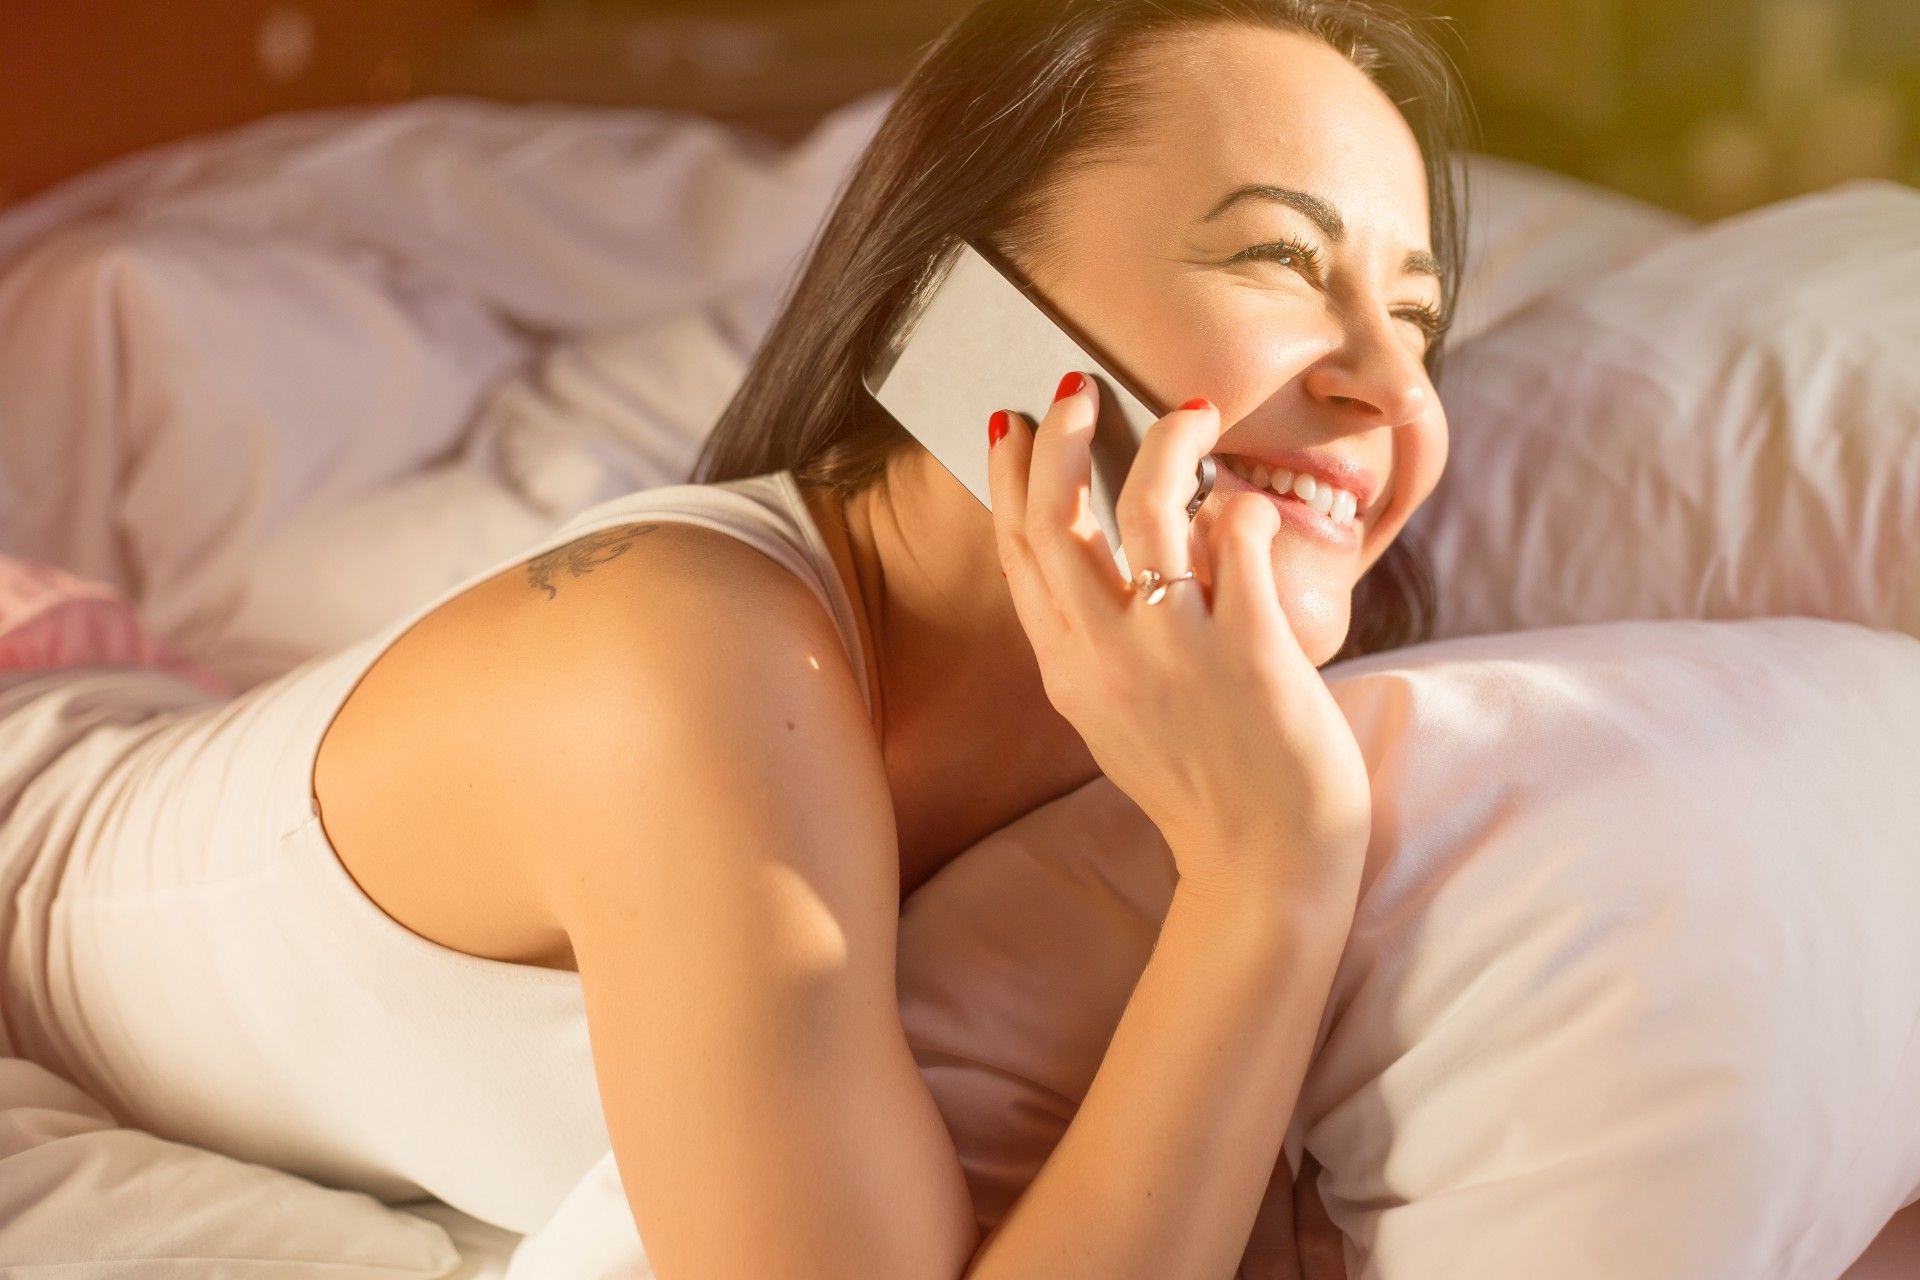 A smiling woman talks on an iPhone while lying on her stomach in bed - iPhone radiation